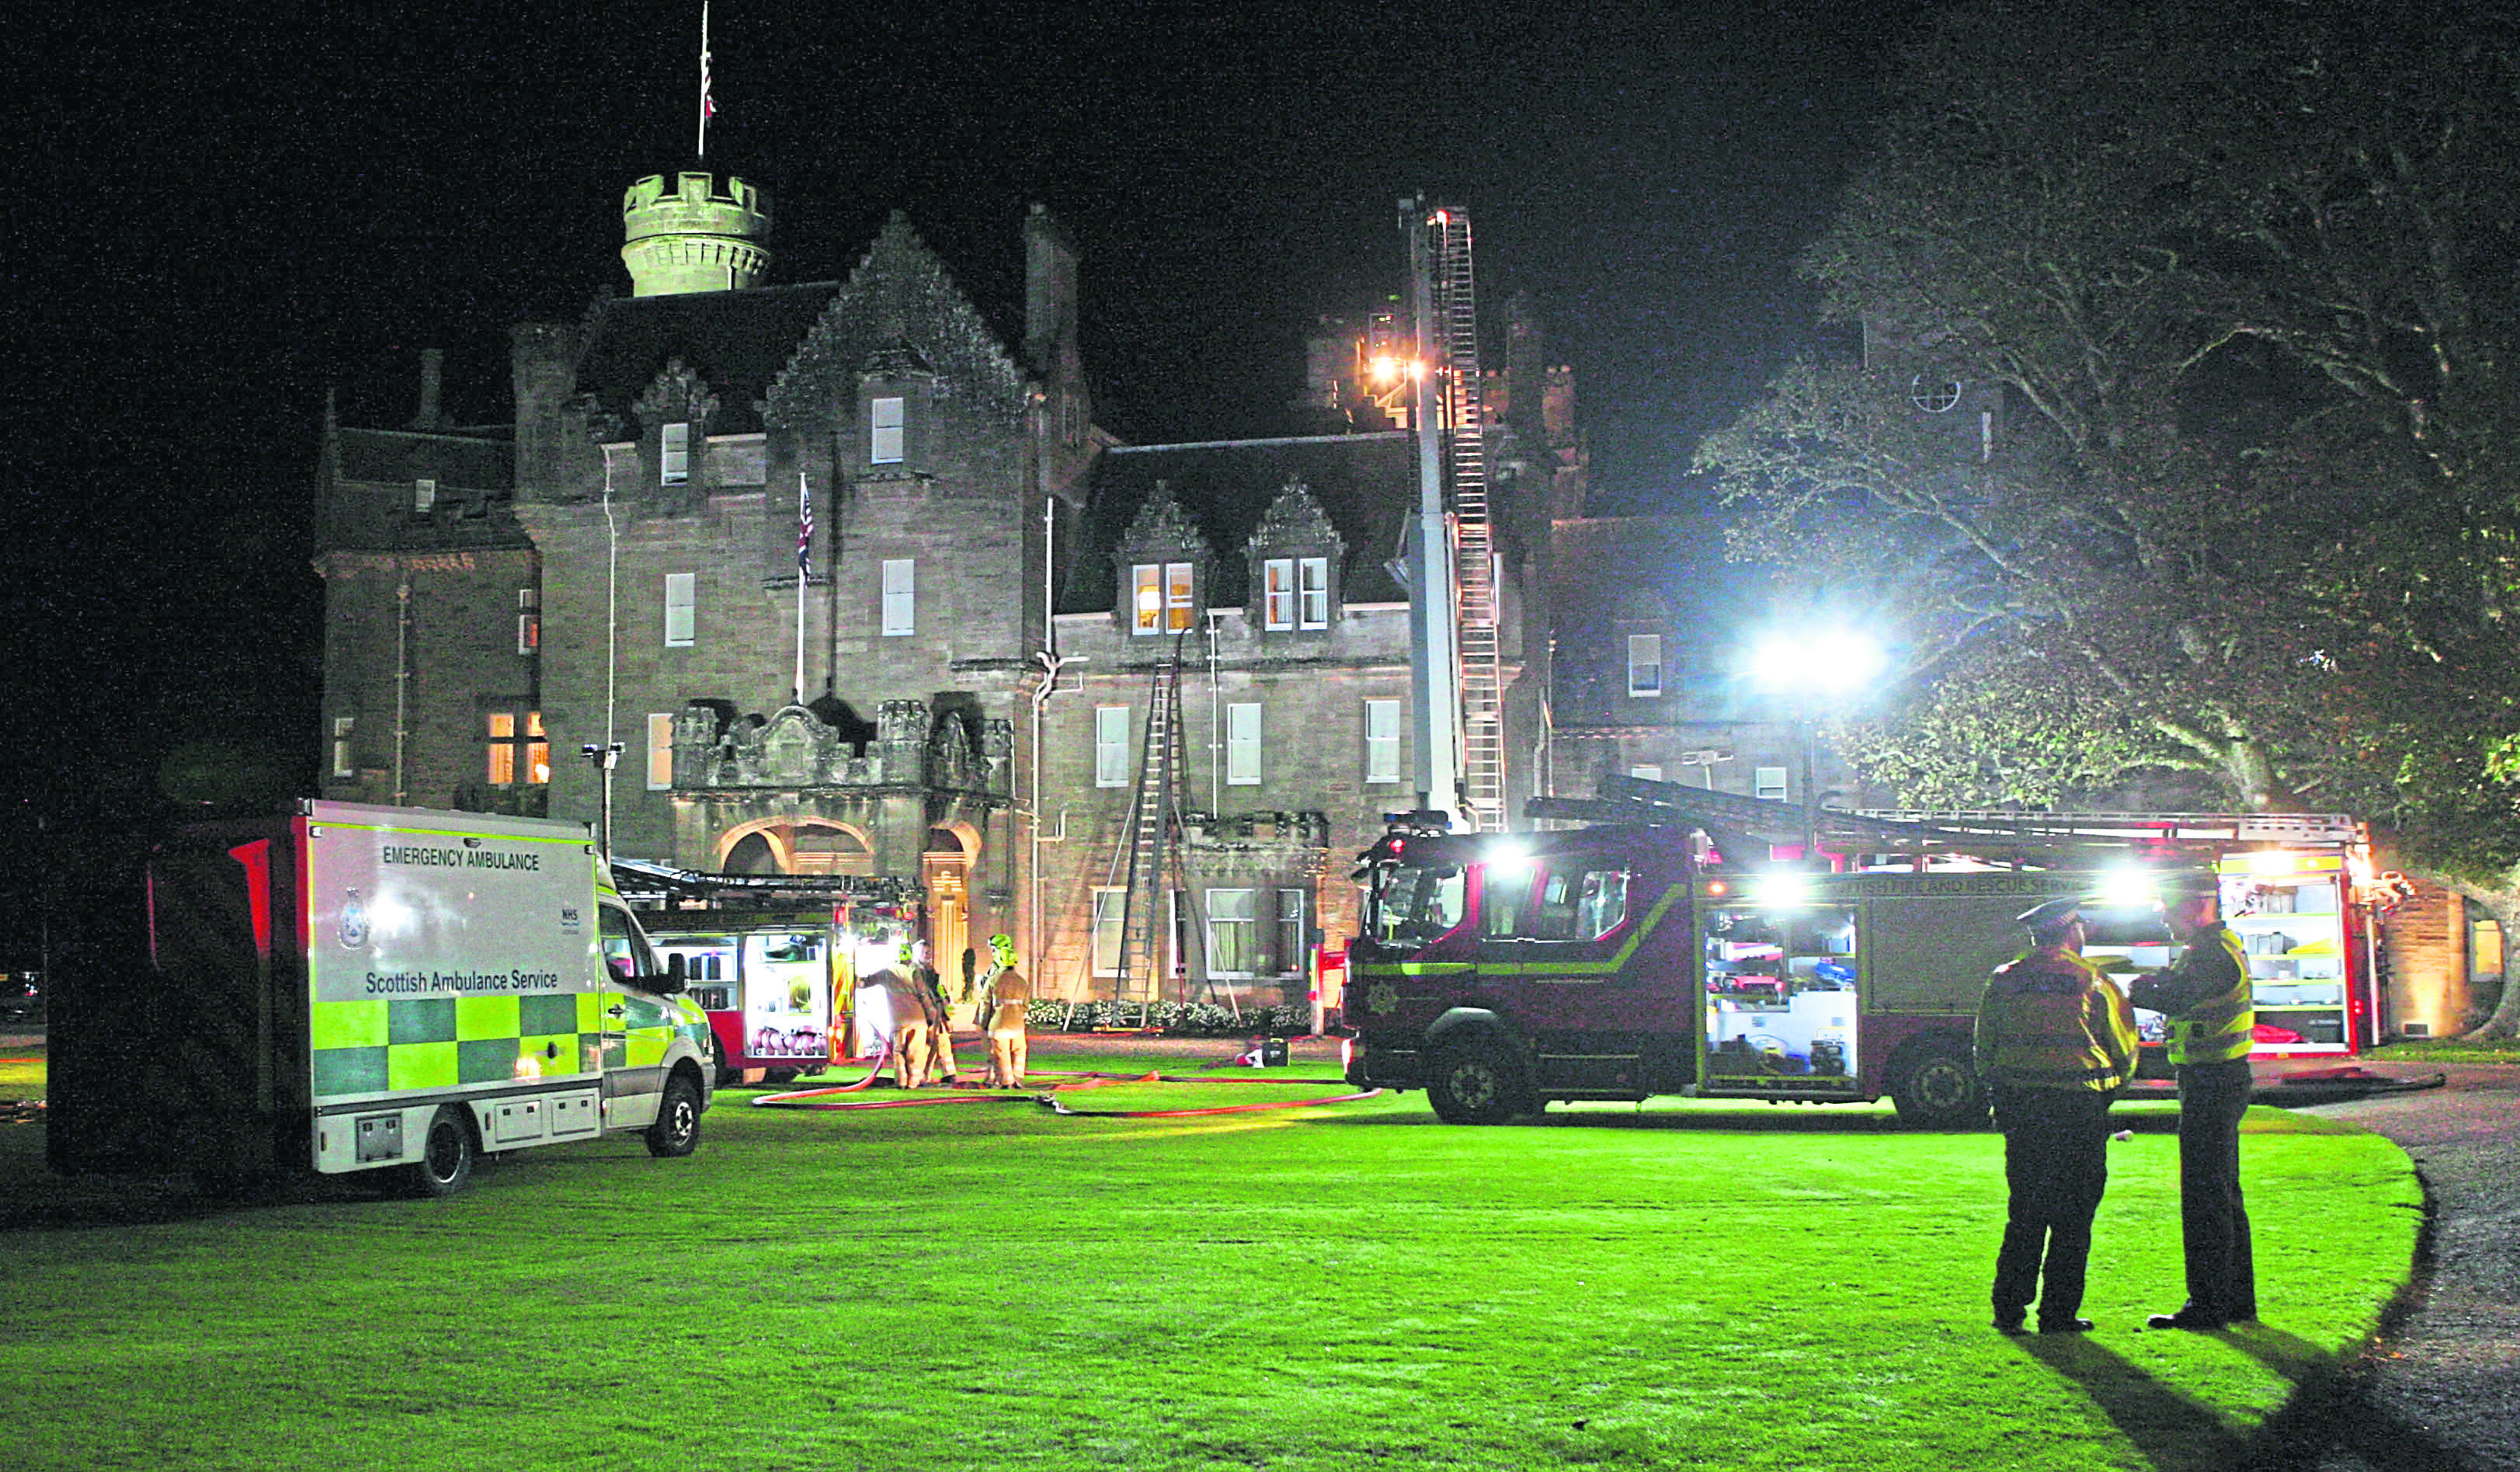 Emergency services attend a fire at Skibo Castle.